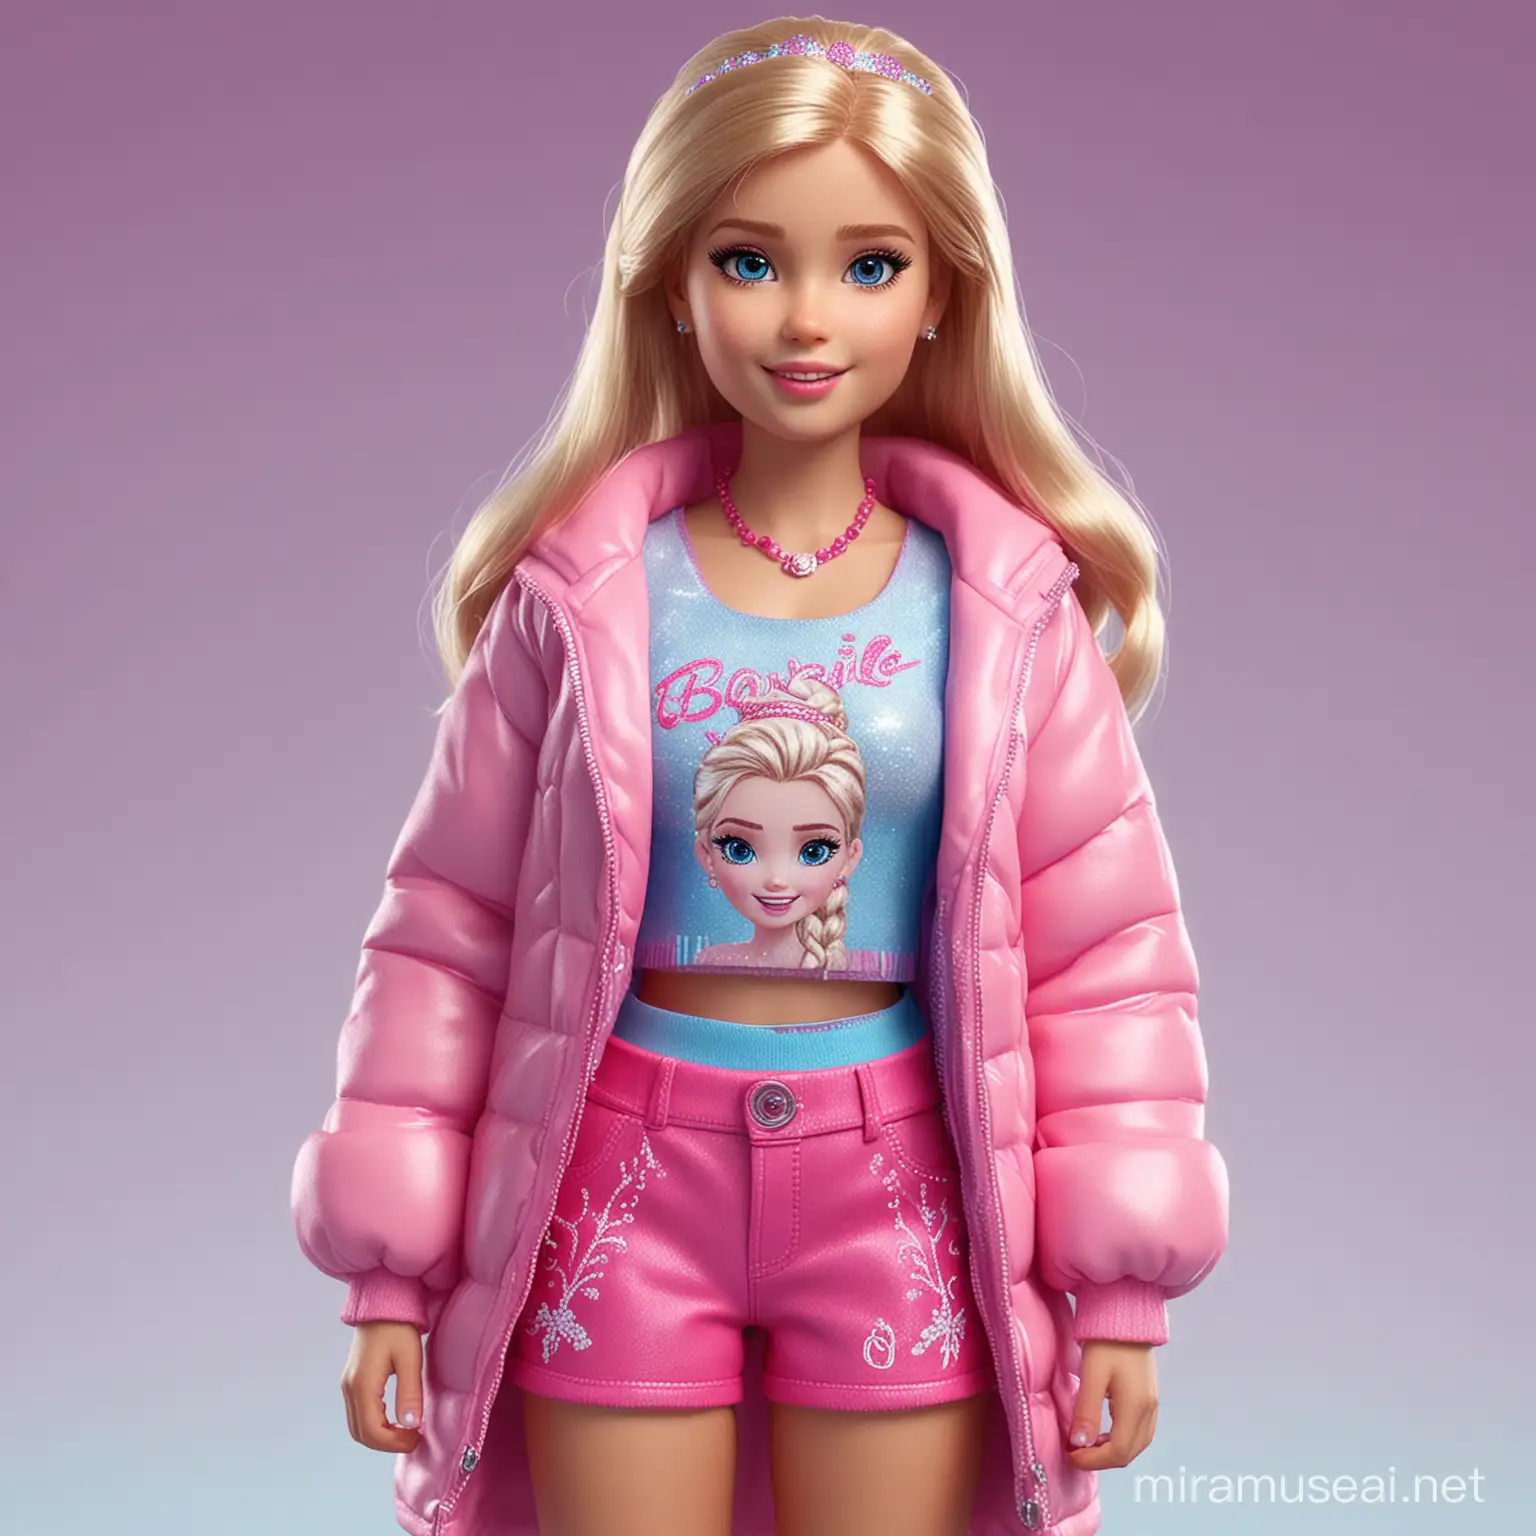 Hyper Realistic 10YearOld Girl in Barbie Style and Frozen Outfit Ultra Detailed Full Body Portrait